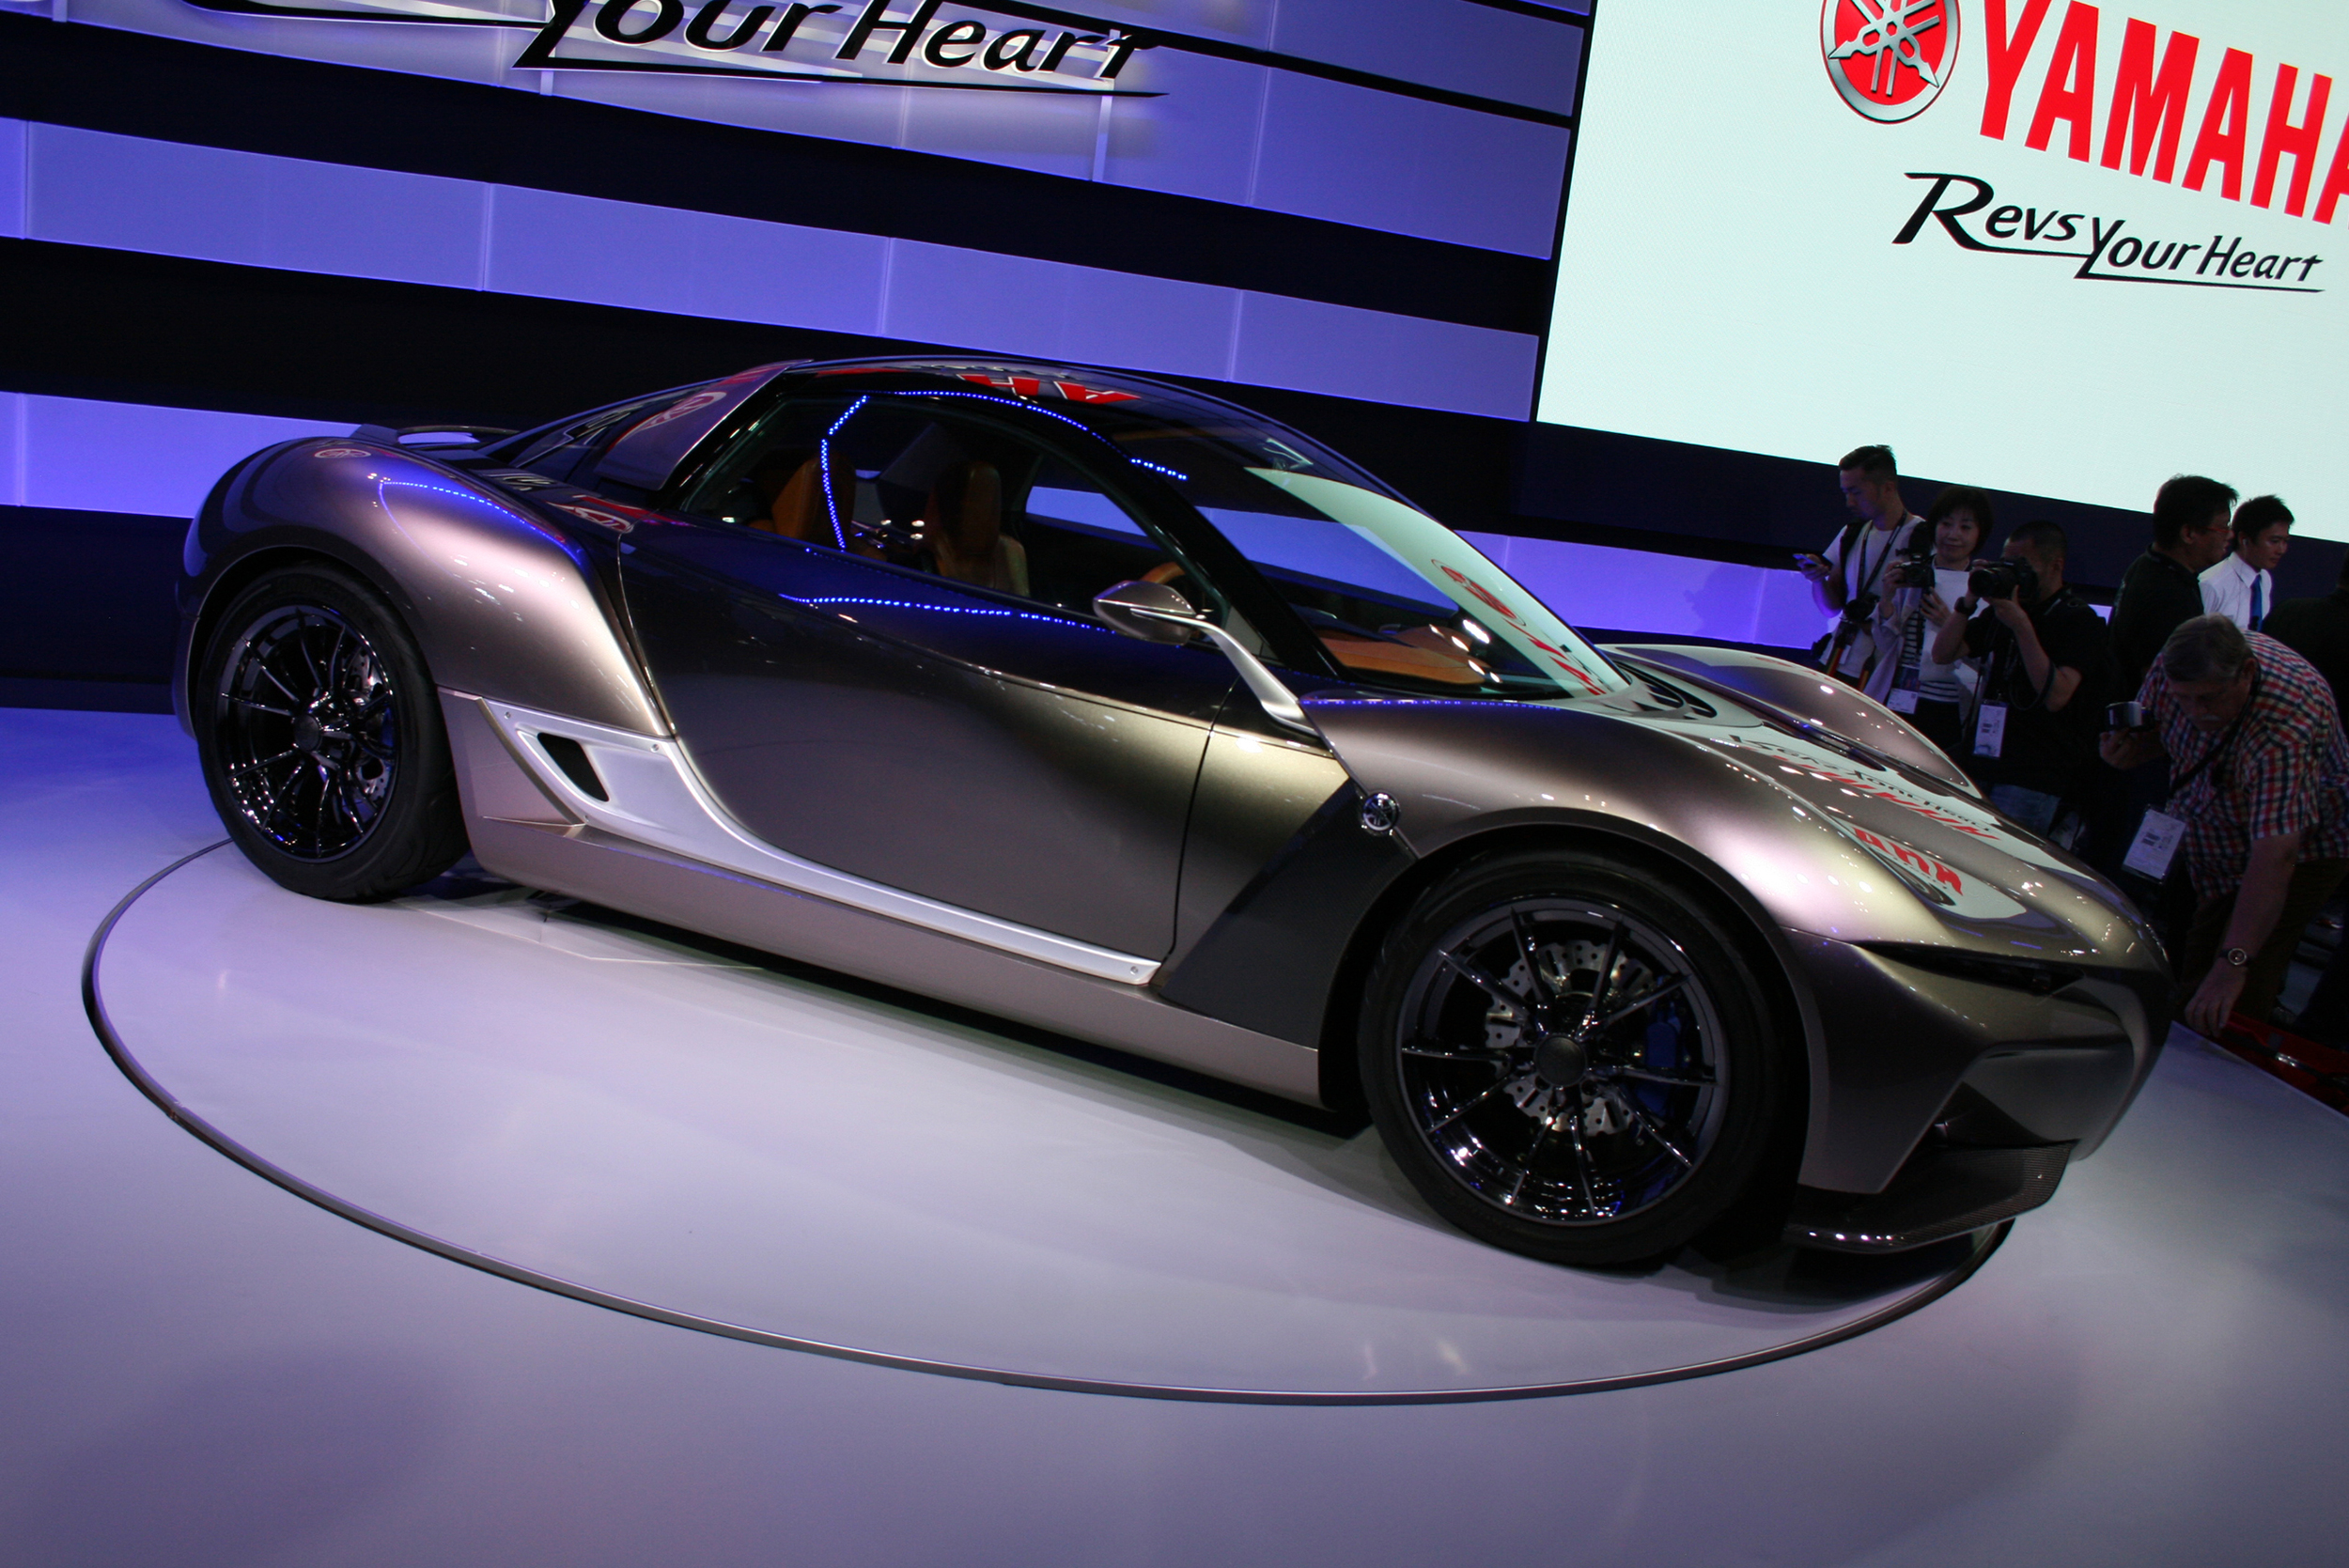 Yamaha reveals new sports car in Tokyo